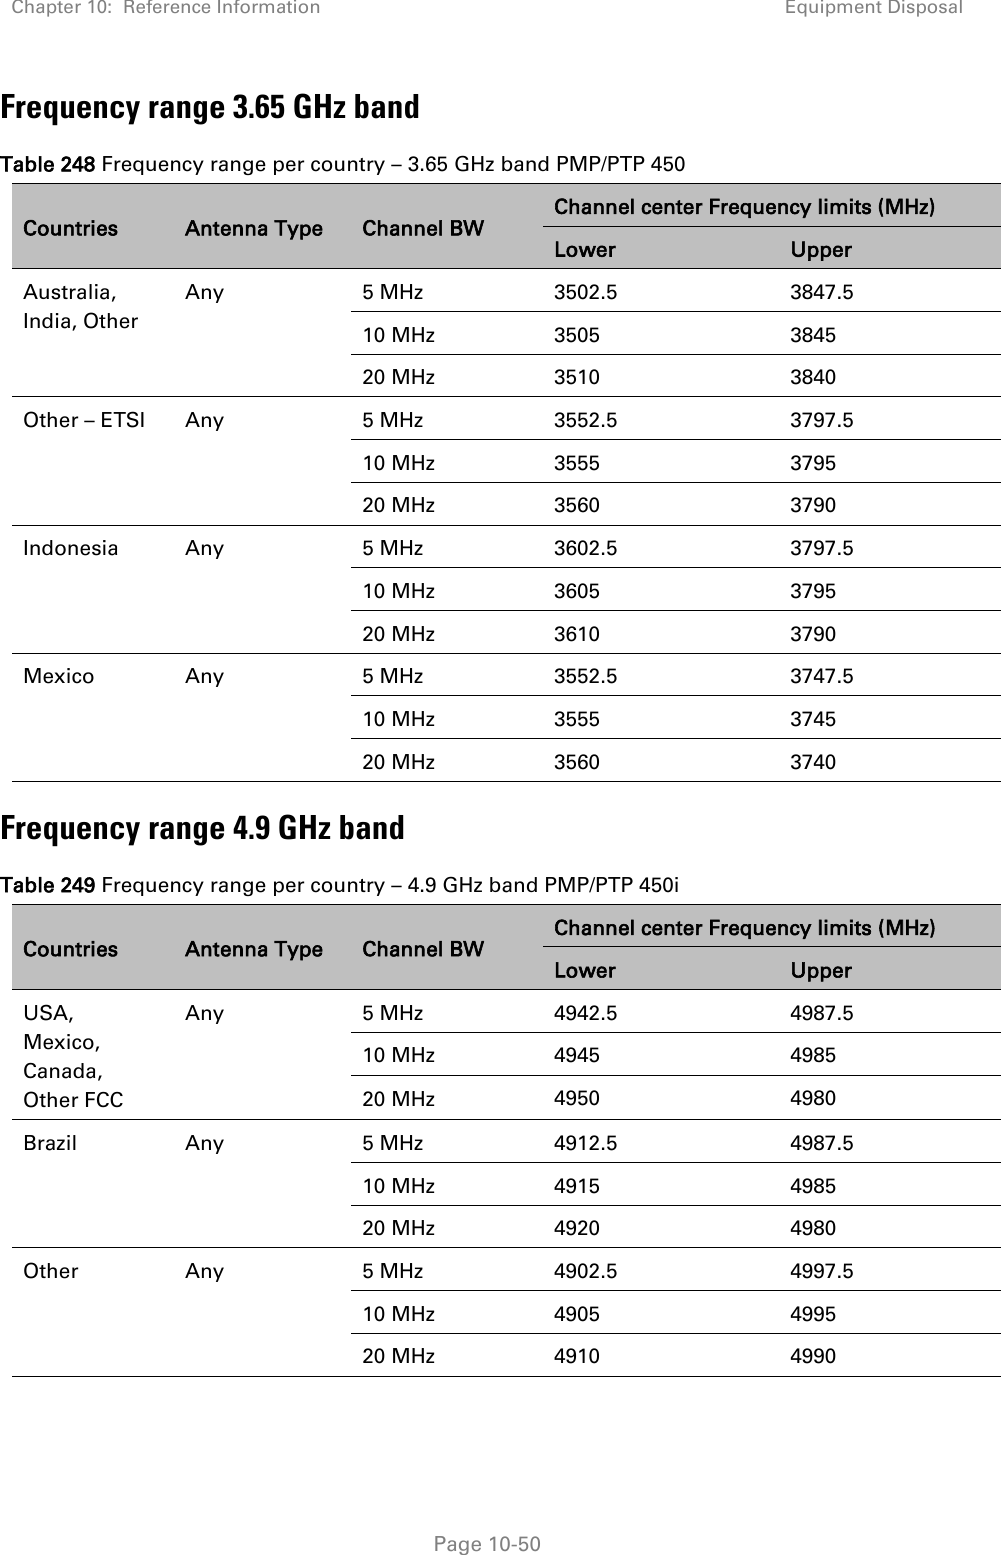 Chapter 10:  Reference Information Equipment Disposal   Page 10-50 Frequency range 3.65 GHz band Table 248 Frequency range per country – 3.65 GHz band PMP/PTP 450 Countries Antenna Type Channel BW Channel center Frequency limits (MHz) Lower Upper Australia, India, Other Any 5 MHz 3502.5 3847.5 10 MHz 3505 3845 20 MHz 3510 3840 Other – ETSI Any 5 MHz 3552.5 3797.5 10 MHz 3555 3795 20 MHz 3560 3790 Indonesia Any 5 MHz 3602.5 3797.5 10 MHz 3605 3795 20 MHz 3610 3790 Mexico Any 5 MHz 3552.5 3747.5 10 MHz 3555 3745 20 MHz 3560 3740 Frequency range 4.9 GHz band Table 249 Frequency range per country – 4.9 GHz band PMP/PTP 450i Countries Antenna Type Channel BW Channel center Frequency limits (MHz) Lower Upper USA, Mexico, Canada, Other FCC Any 5 MHz 4942.5 4987.5 10 MHz 4945 4985 20 MHz 4950 4980 Brazil Any 5 MHz 4912.5 4987.5 10 MHz 4915 4985 20 MHz 4920 4980 Other Any 5 MHz 4902.5 4997.5 10 MHz 4905 4995 20 MHz 4910 4990  